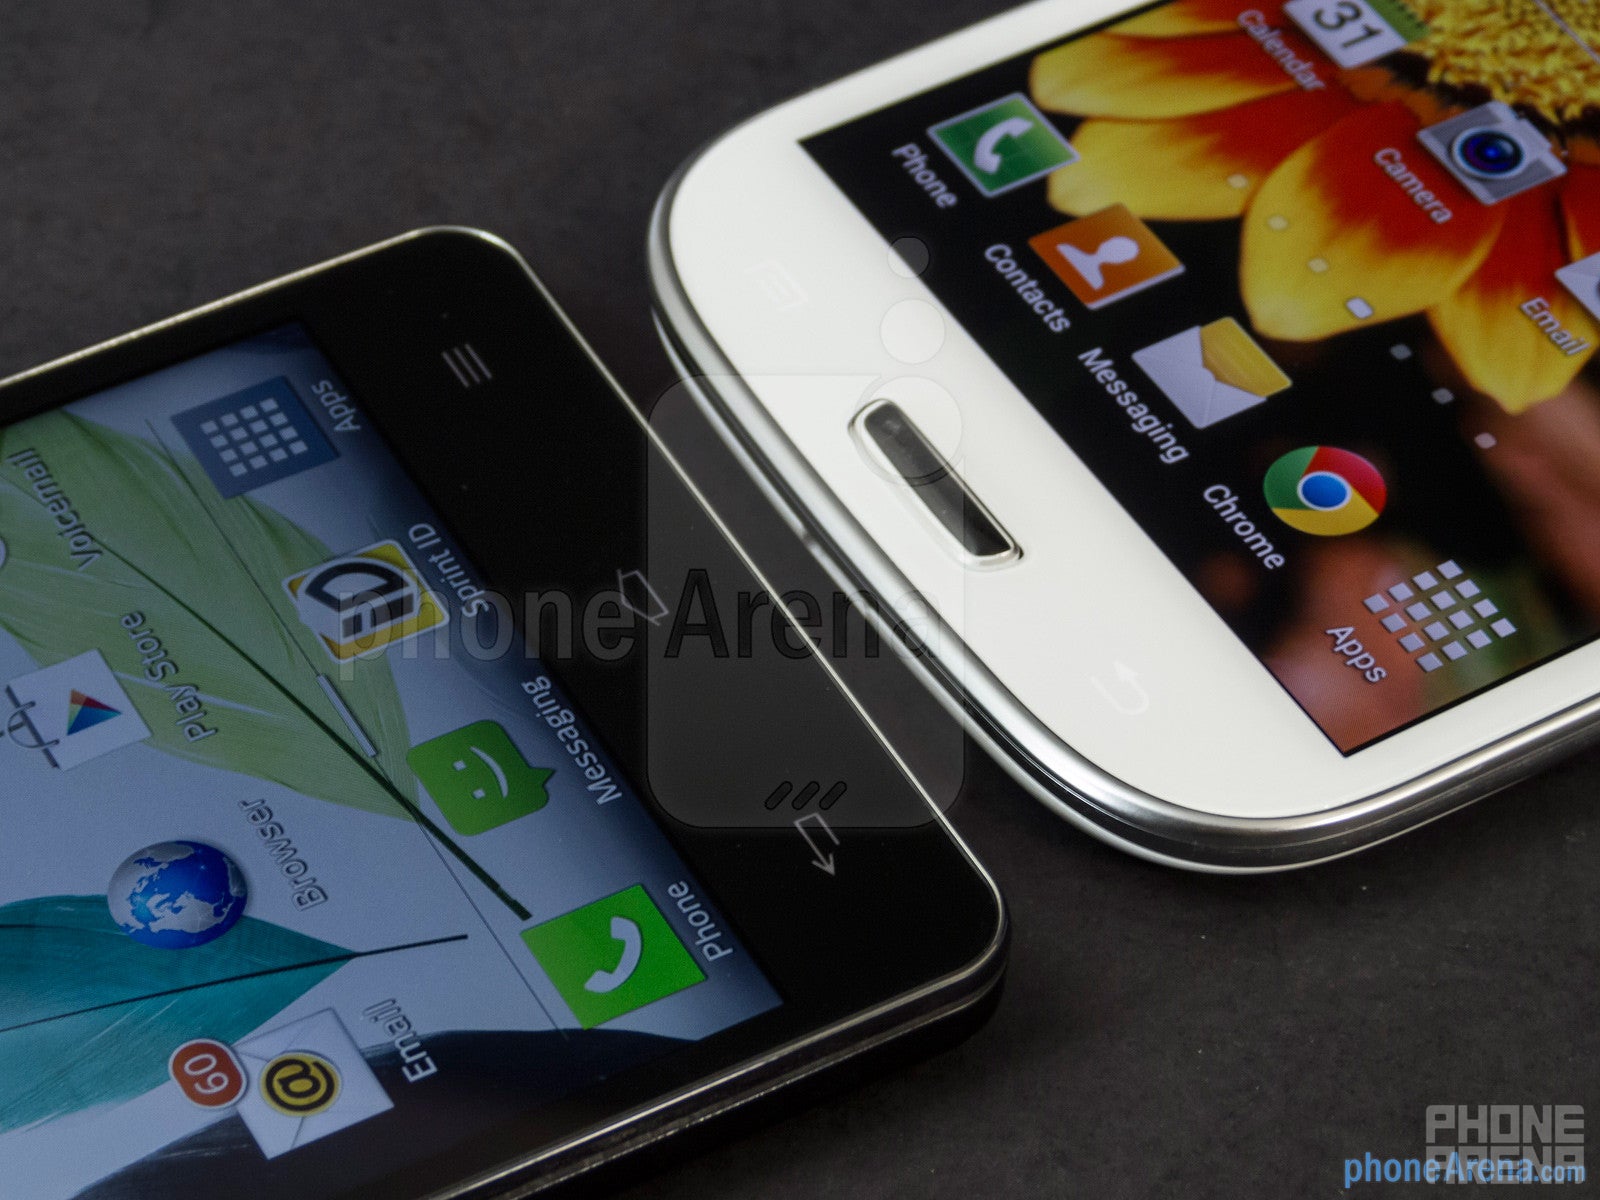 The capacitive buttons below the screens - LG Optimus G vs Samsung Galaxy S III